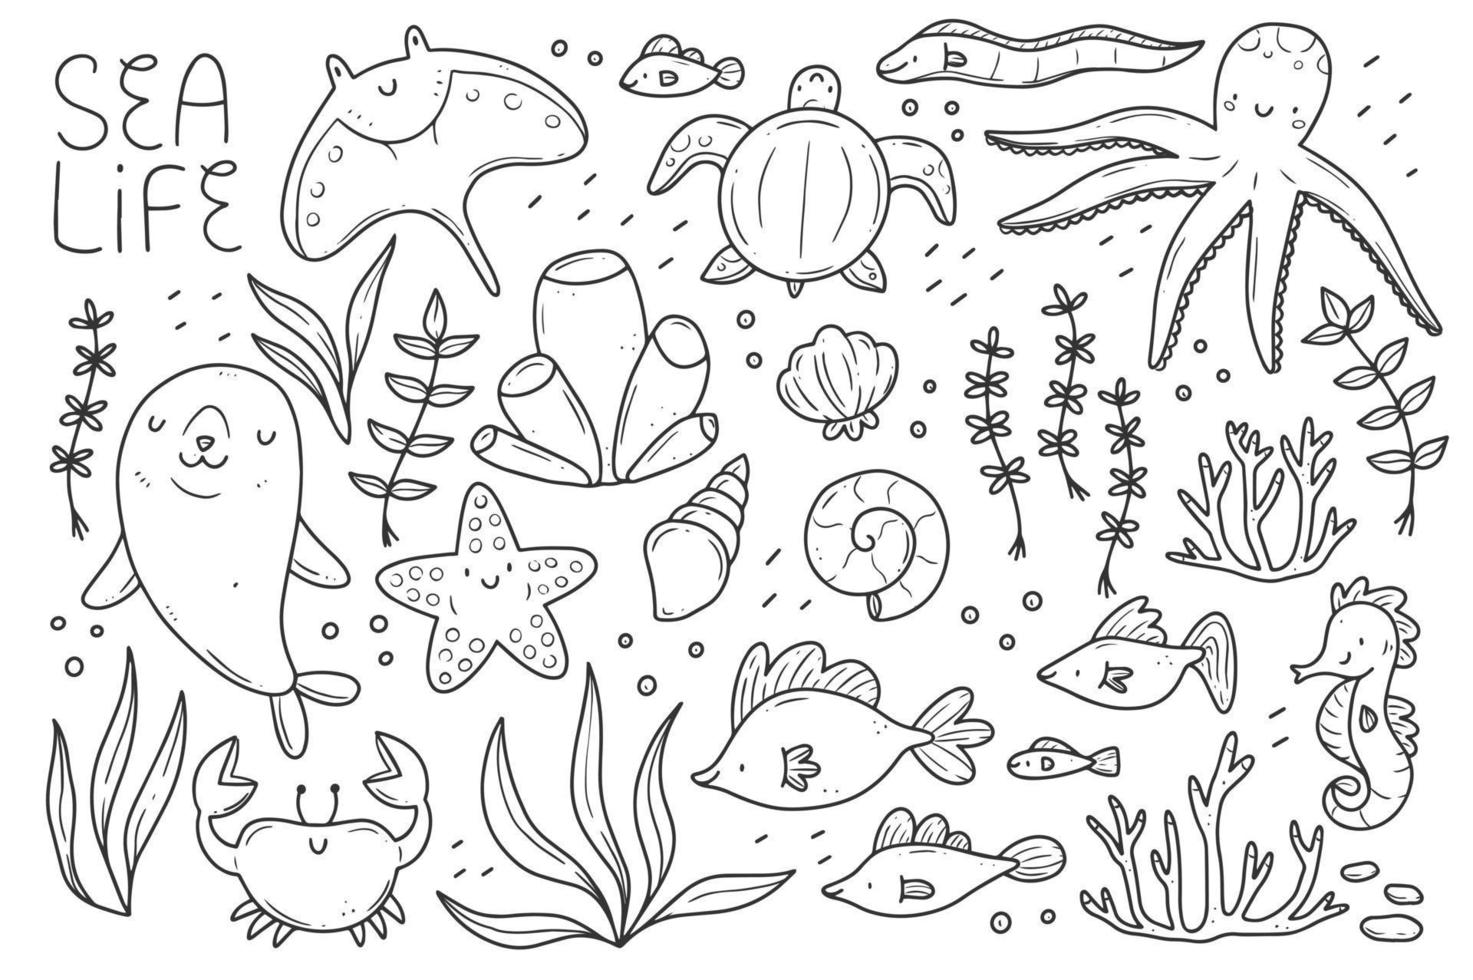 Sea life doodle set. Marine animals in linear style. Collection of marine elements. Vector isolated illustration.